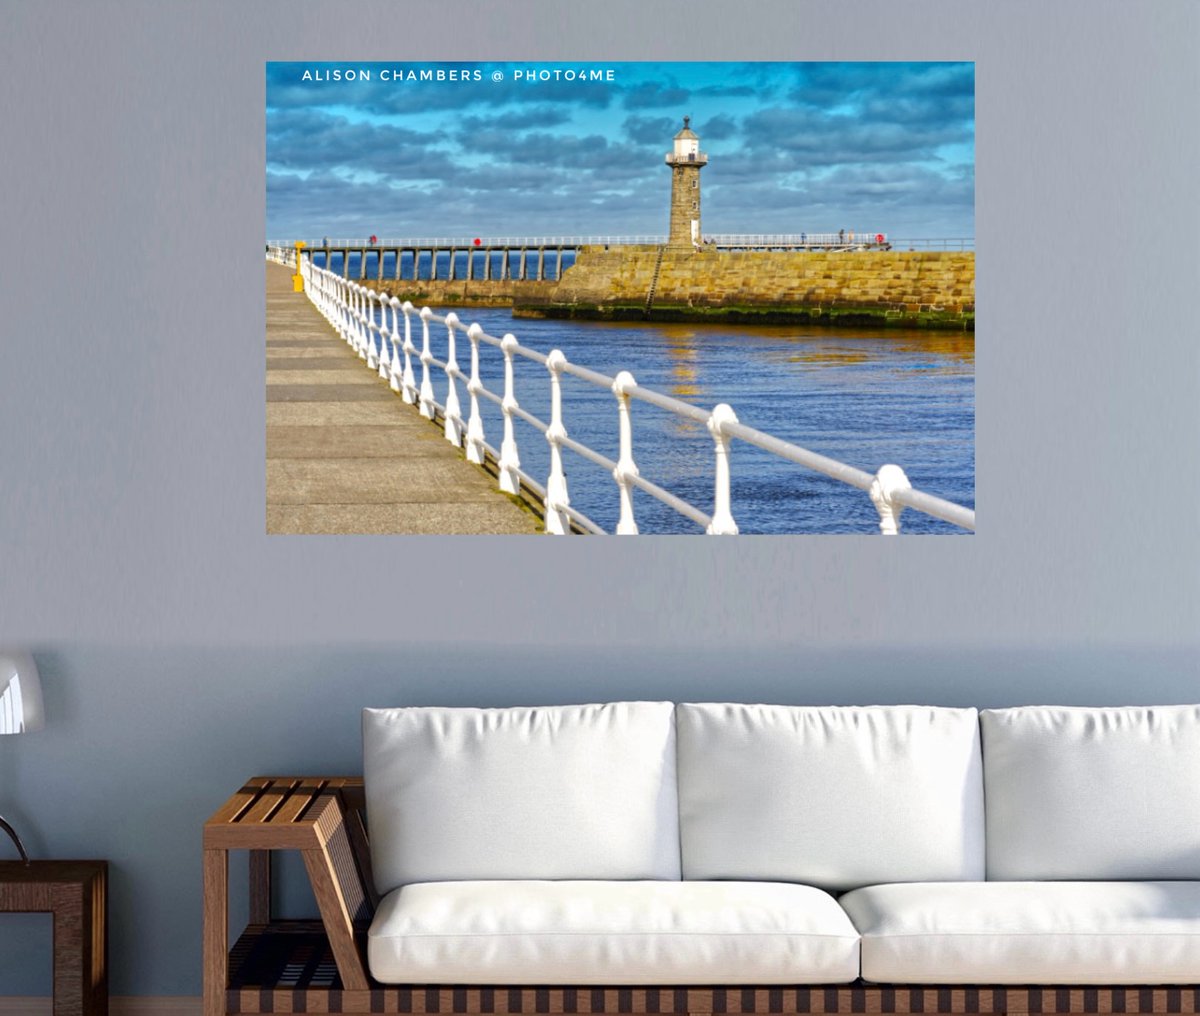 Whitby Lighthouse©️. Available from; shop.photo4me.com/1328099 & redbubble.com/shop/ap/160776… & 2-alison-chambers.pixels.com #whitbylighthouse #whitby #whitbypier #photo4me #redbubbleartist #fineartamericaartist #lighthouse #yorkshirecoastphotography